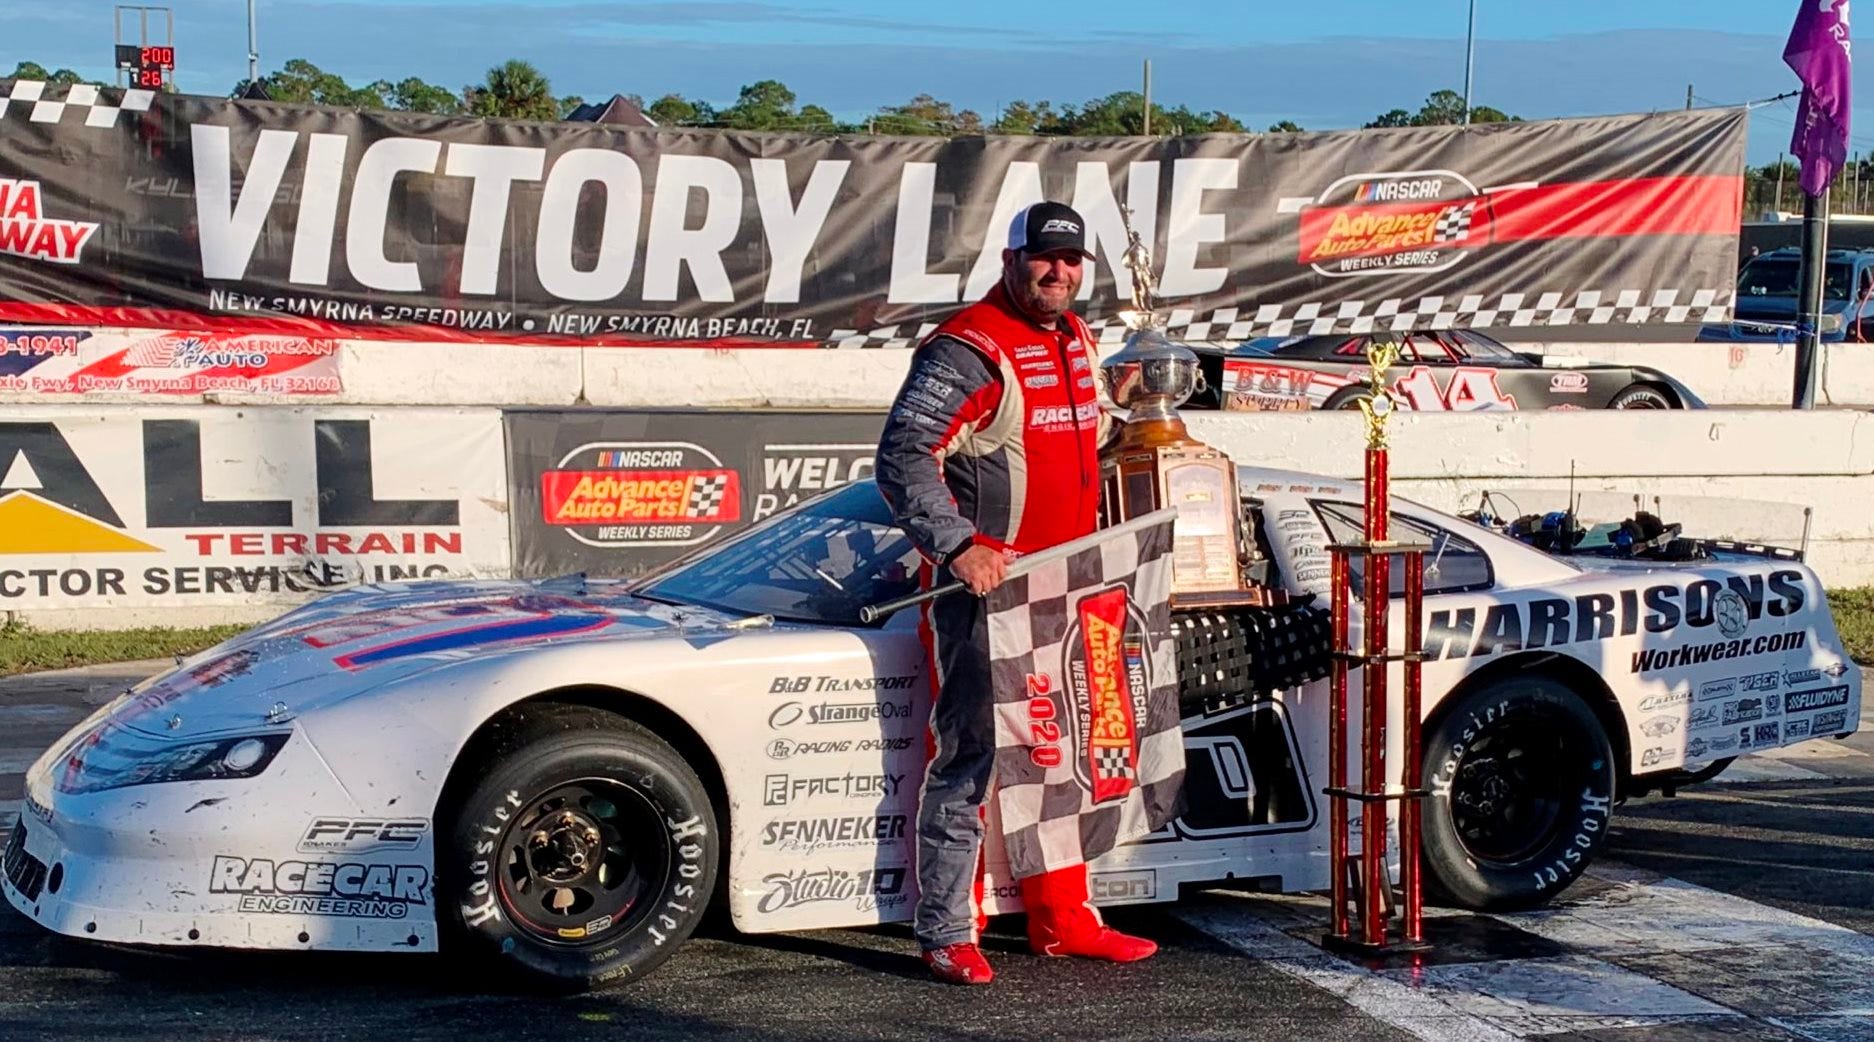 Georgia S Pollard Scores Governor S Cup Win At New Smyrna Speedway